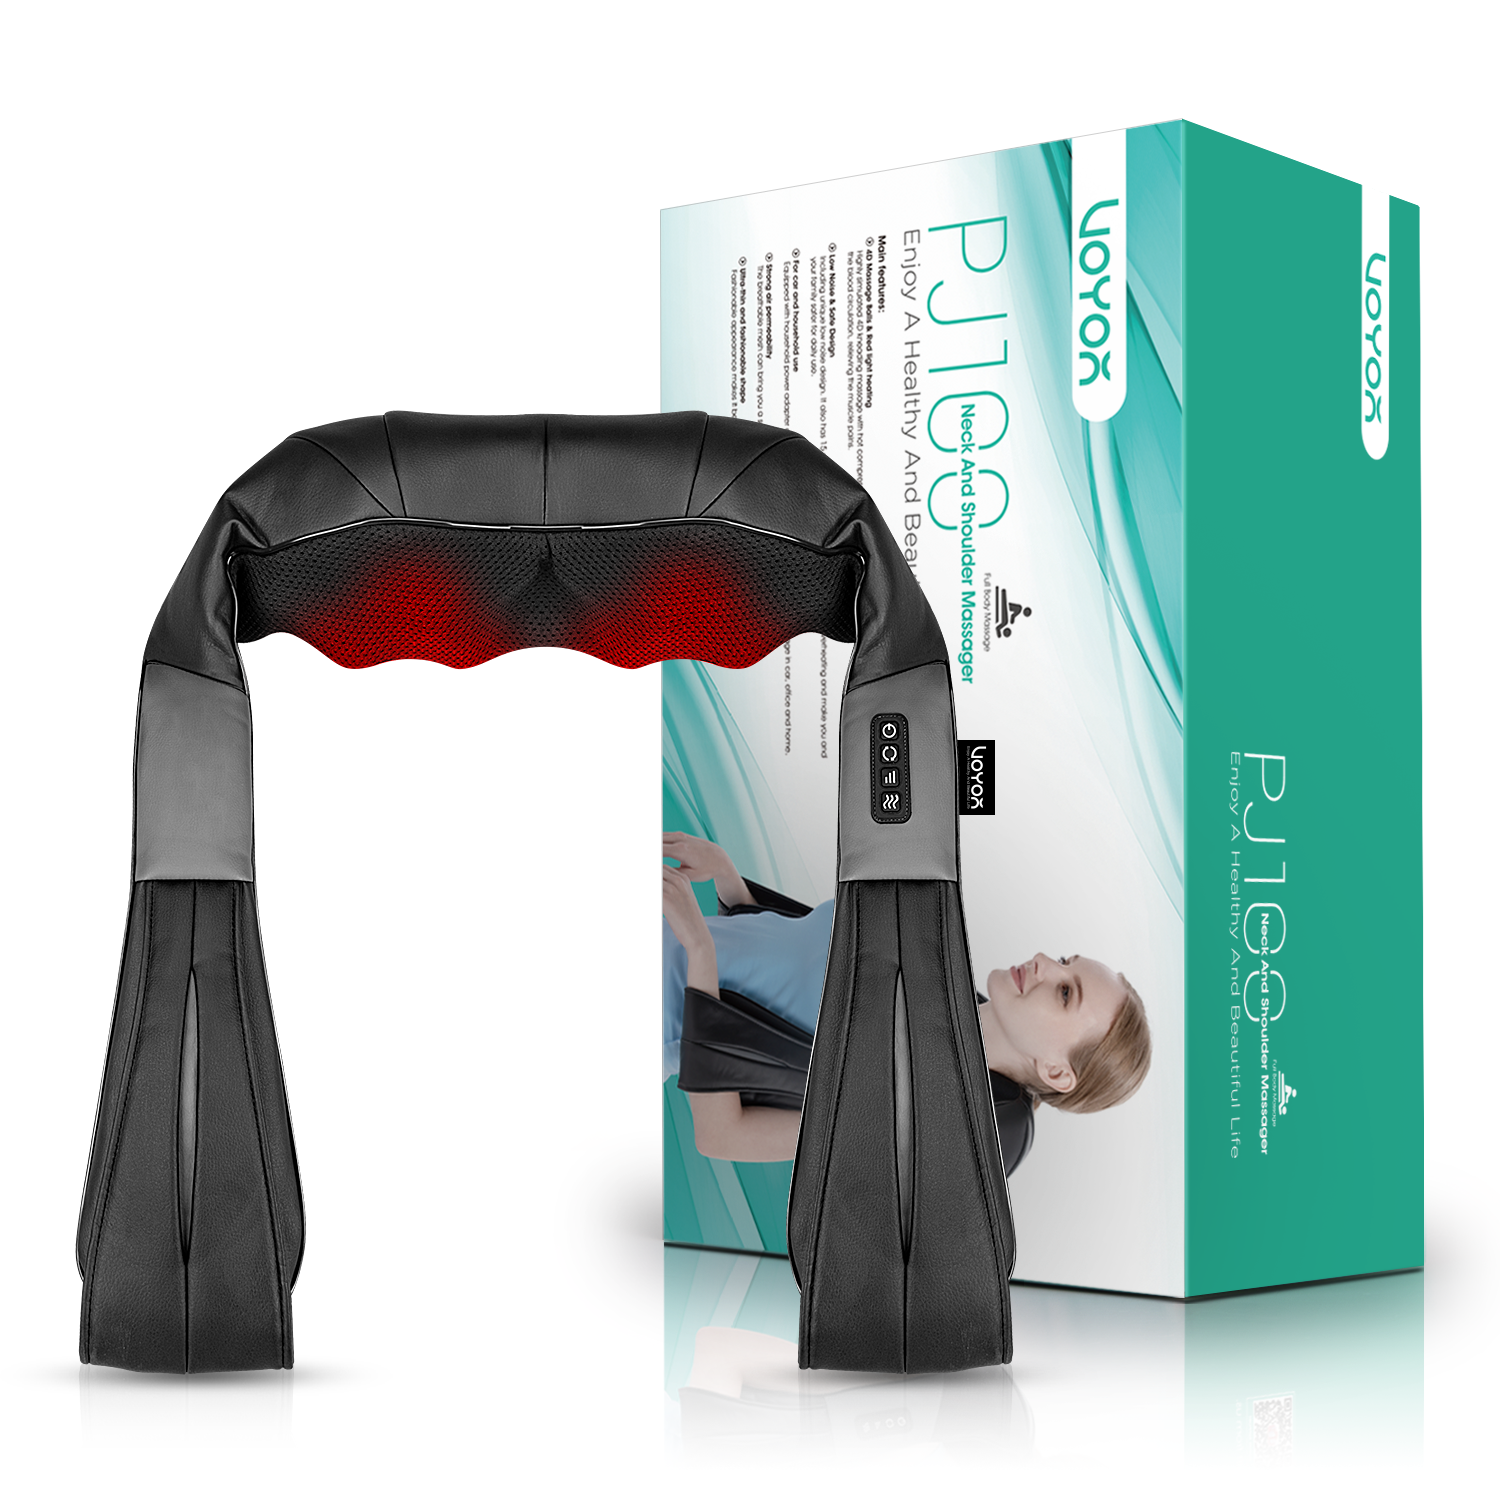 Nekteck Shiatsu Back and Neck Massager with Adjustable Heat and Strap, Deep